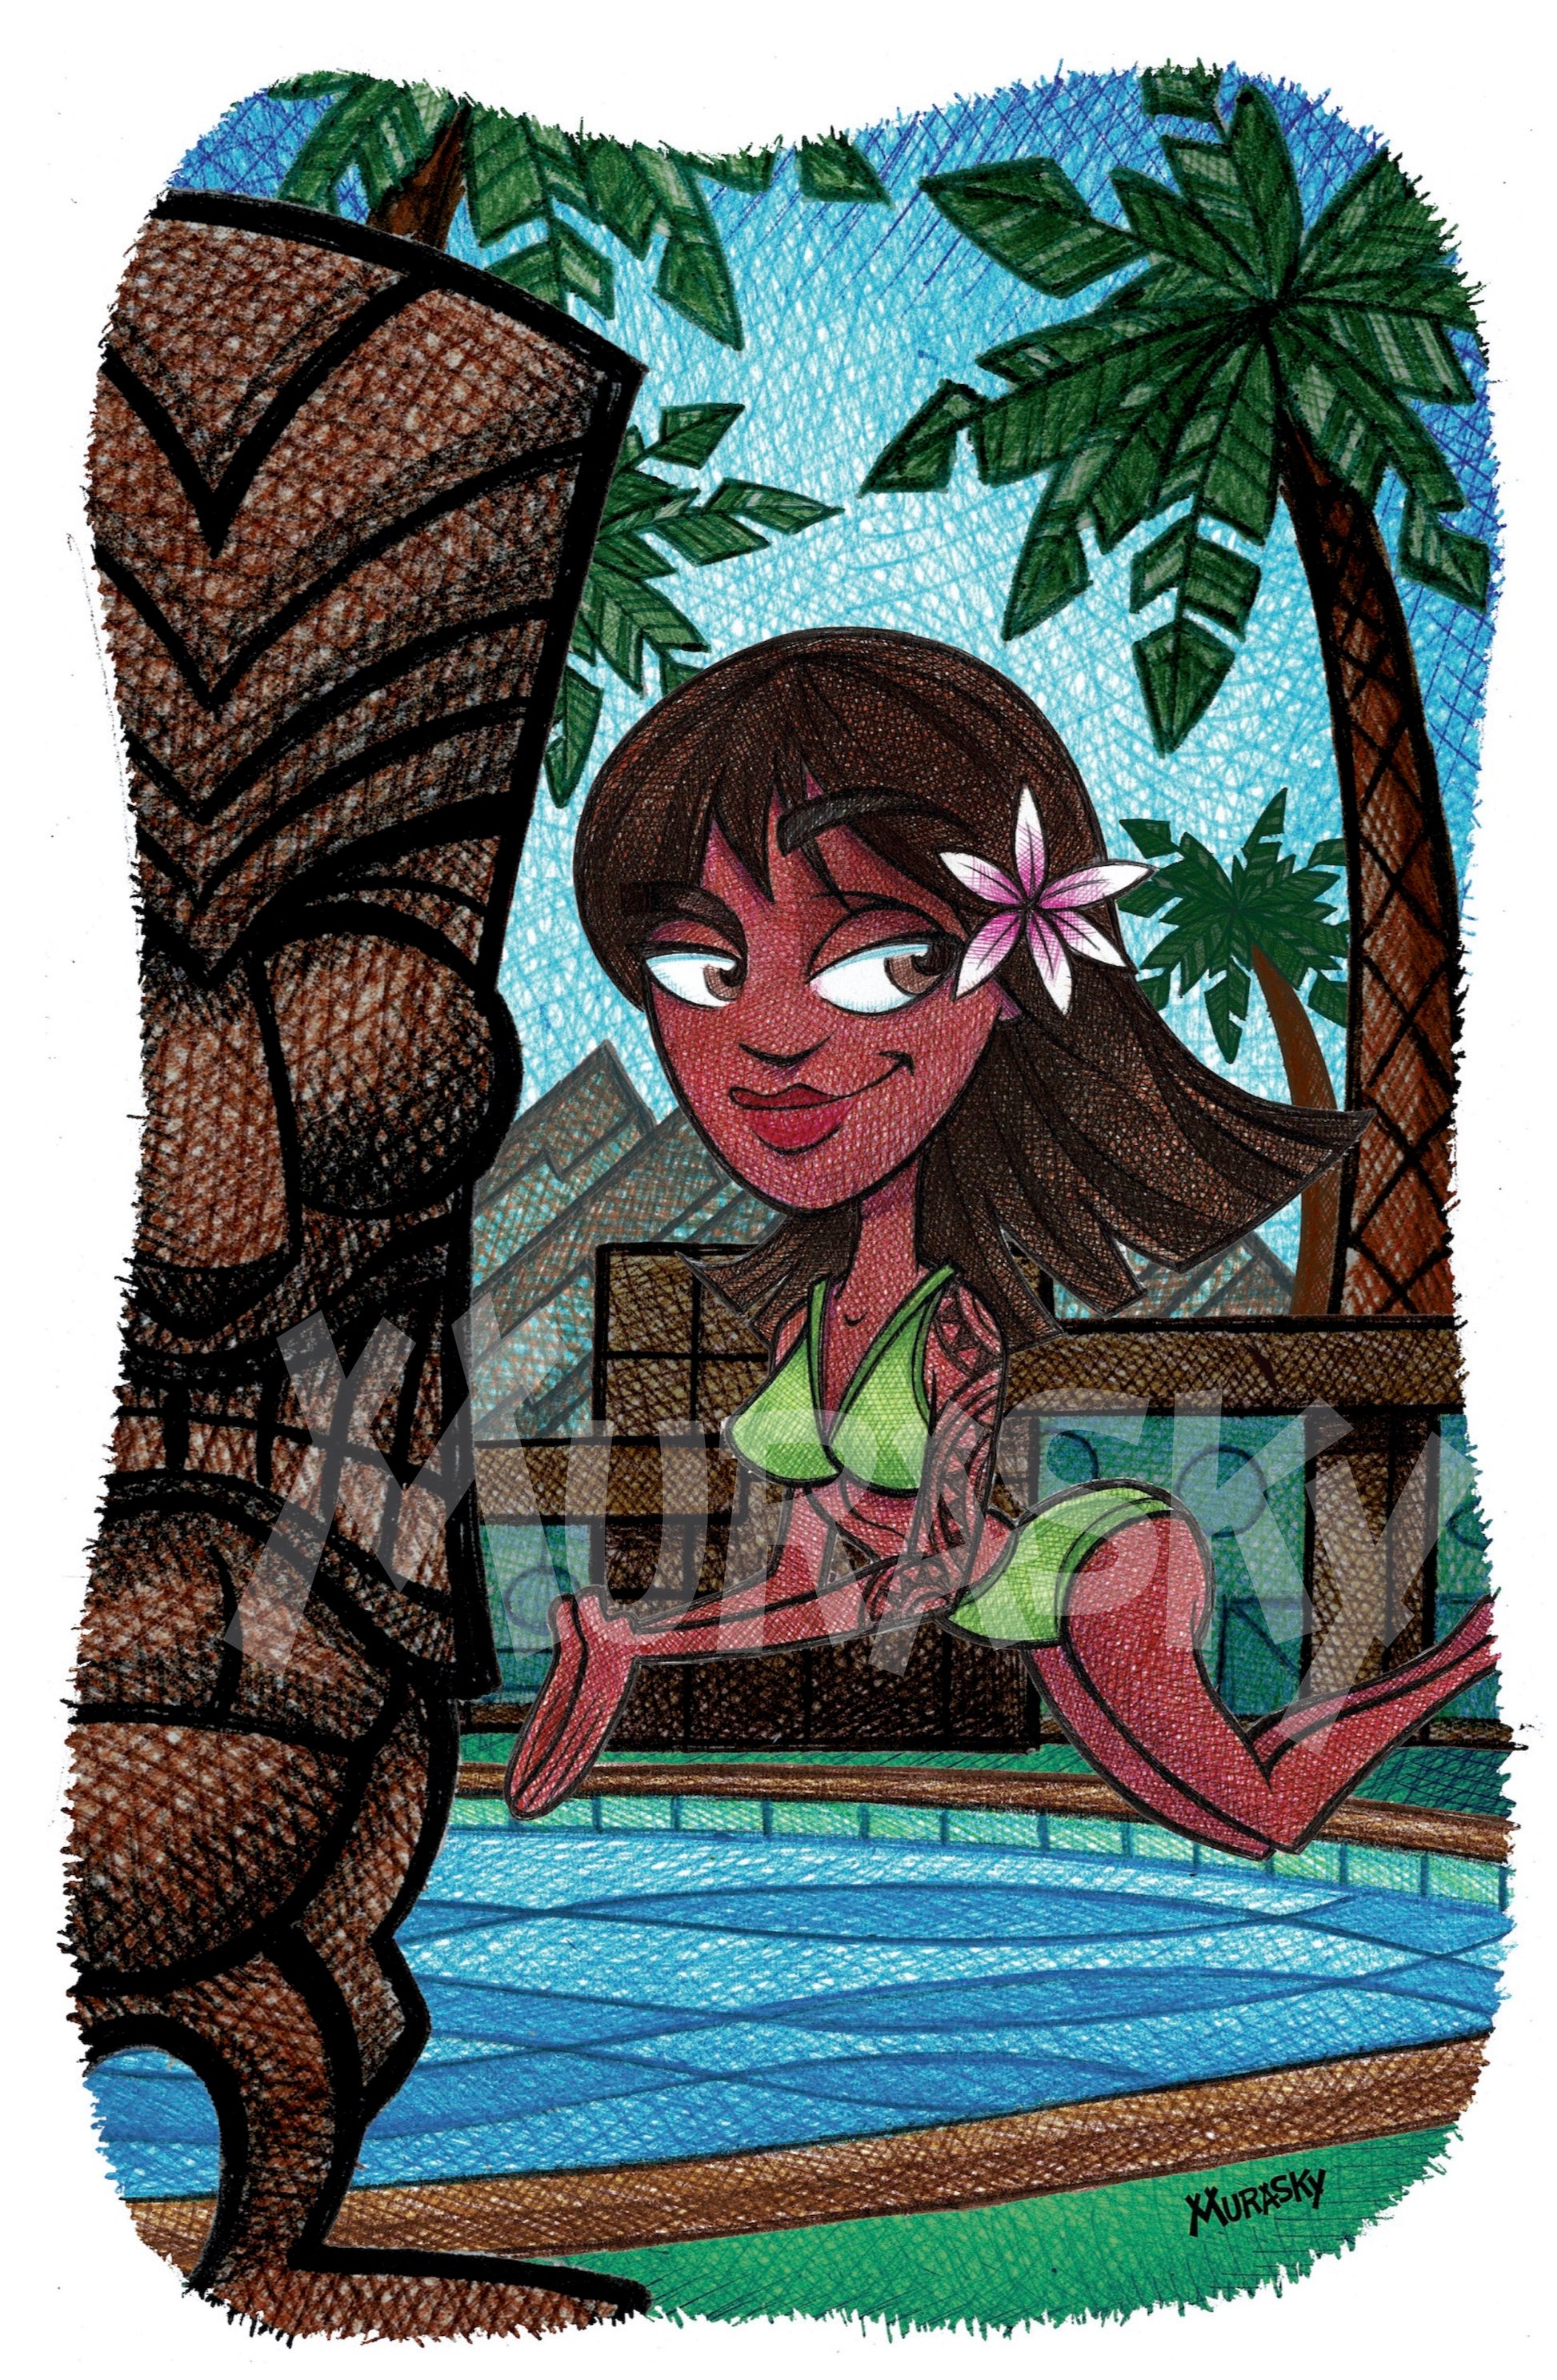 Woman, wearing a bikini, diving into a pool, with a large tiki in the foreground.